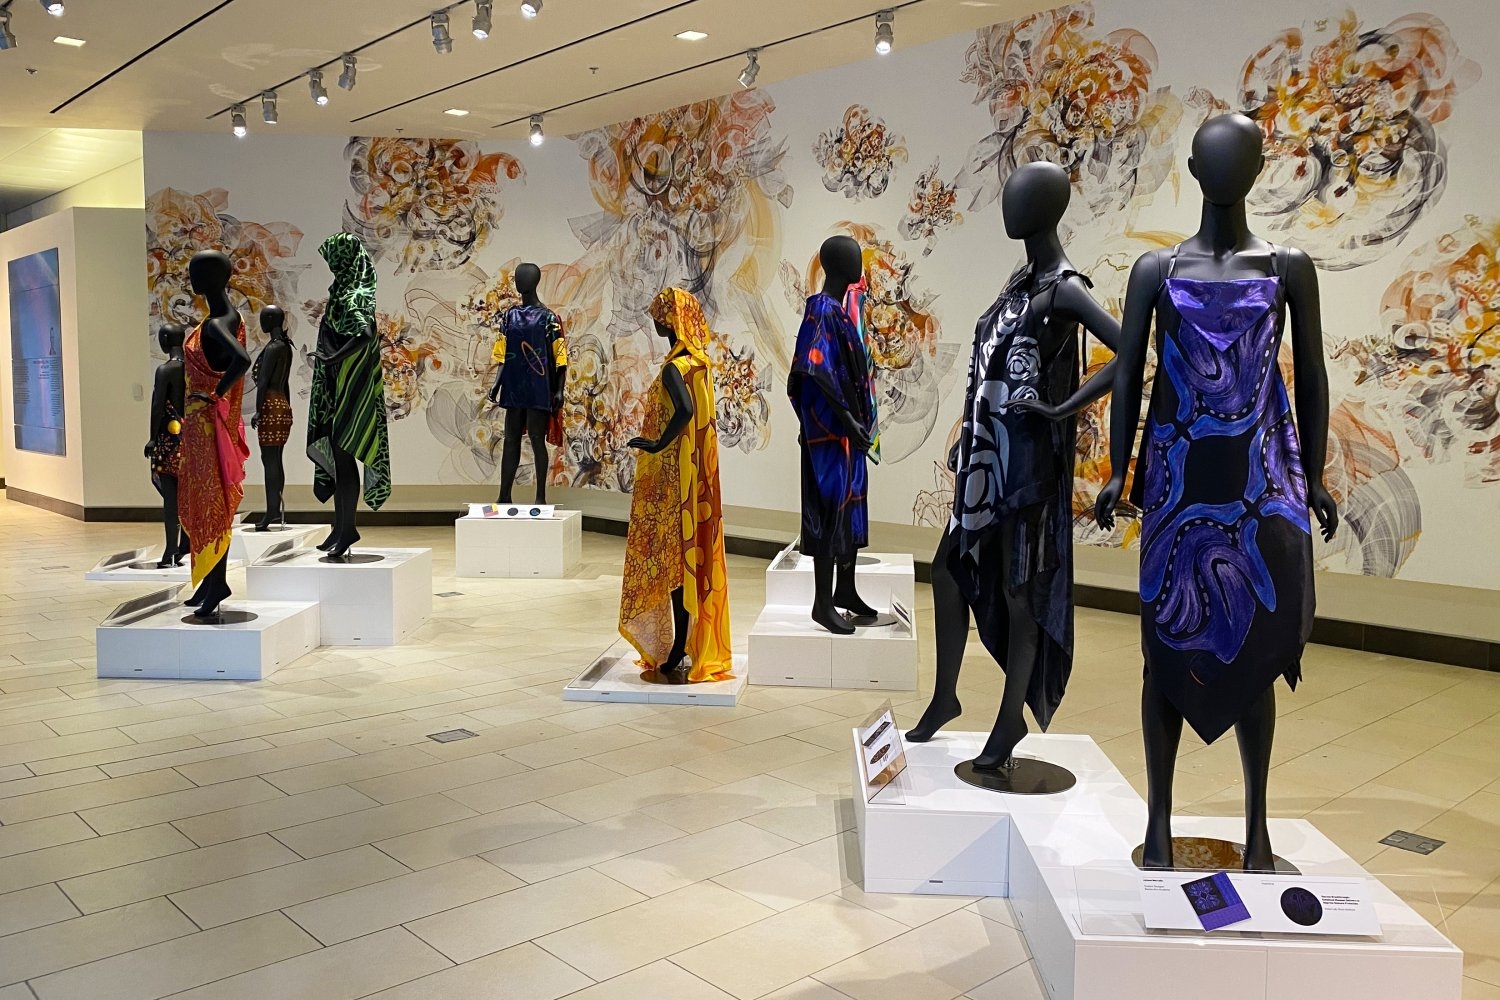 The Science Surfaces exhibition features student-designed fashion inspired by MIT biomedical research images.